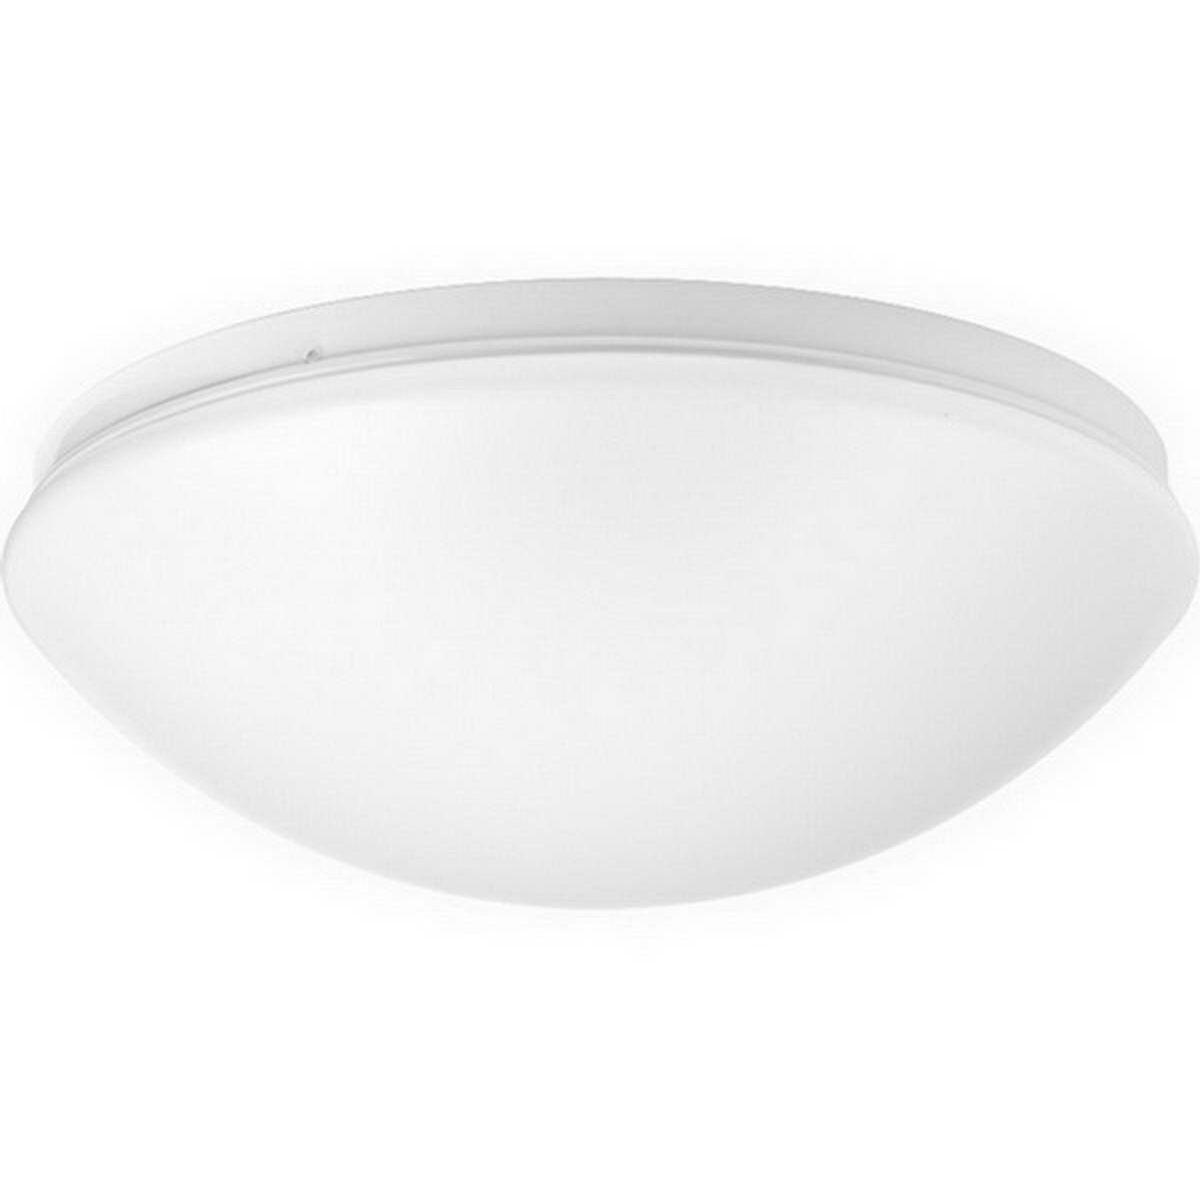 Drums and Clouds 11 in LED Ceiling Puff Light 3000 Lumens 3000K White finish